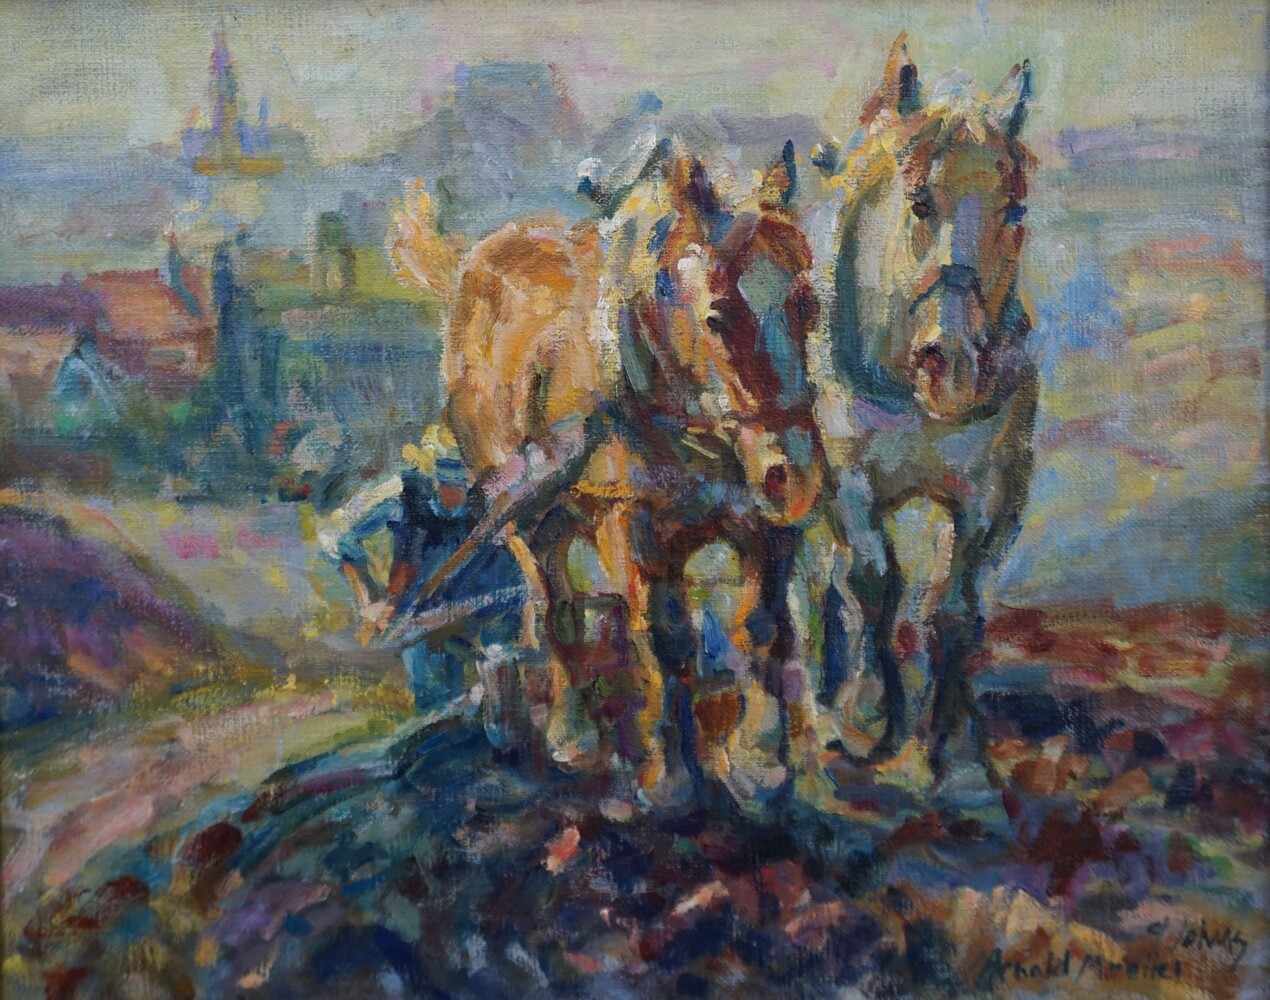 Ploughing with horses and farmerSOLD